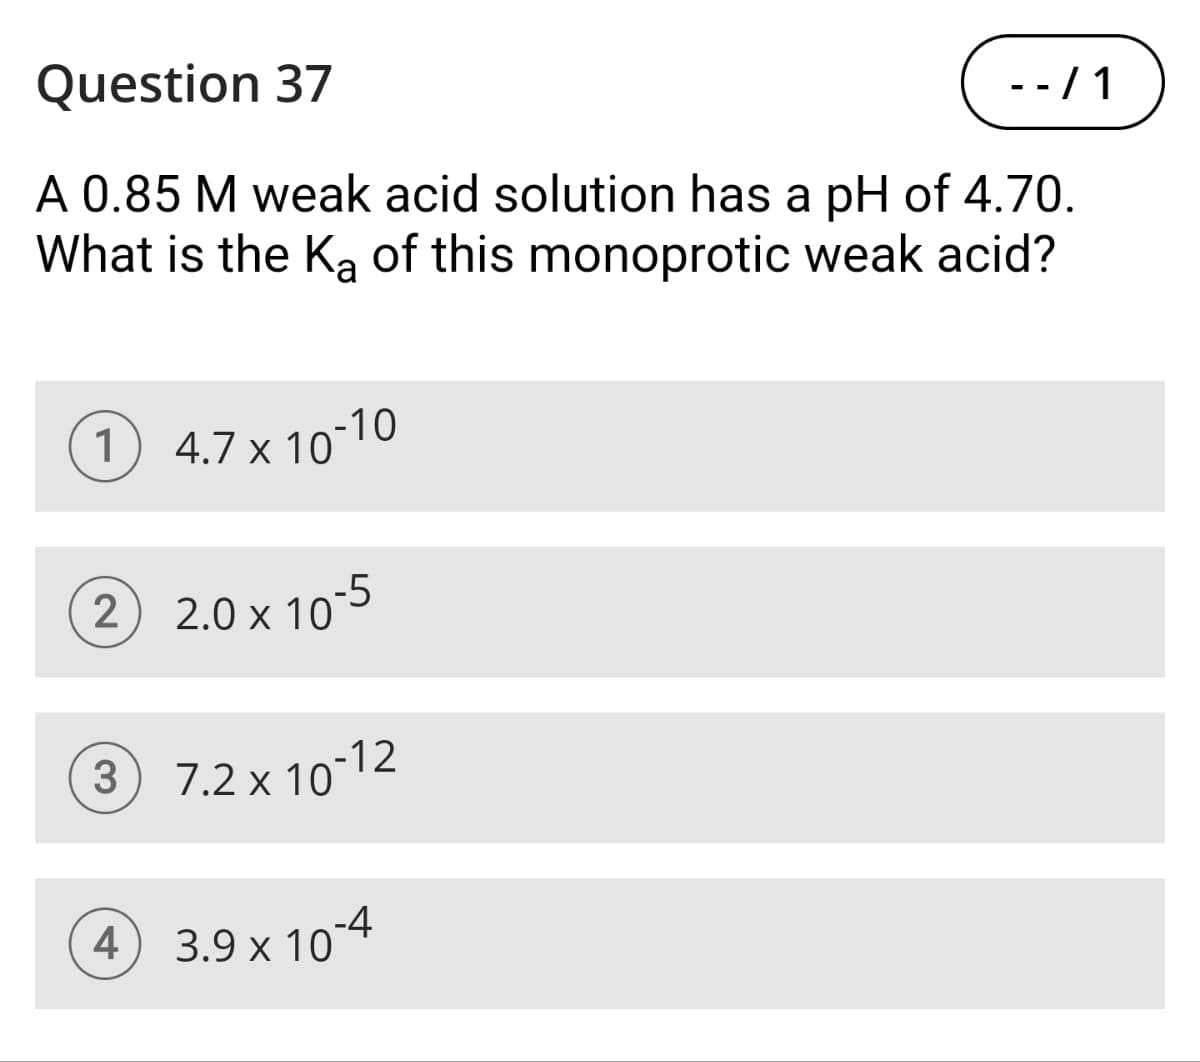 Question 37
- - / 1
A 0.85 M weak acid solution has a pH of 4.70.
What is the Ka of this monoprotic weak acid?
1 4.7 × 10-10
2 2.0 × 10-5
x
3 7.2 × 10-12
4
3.9 × 10-4